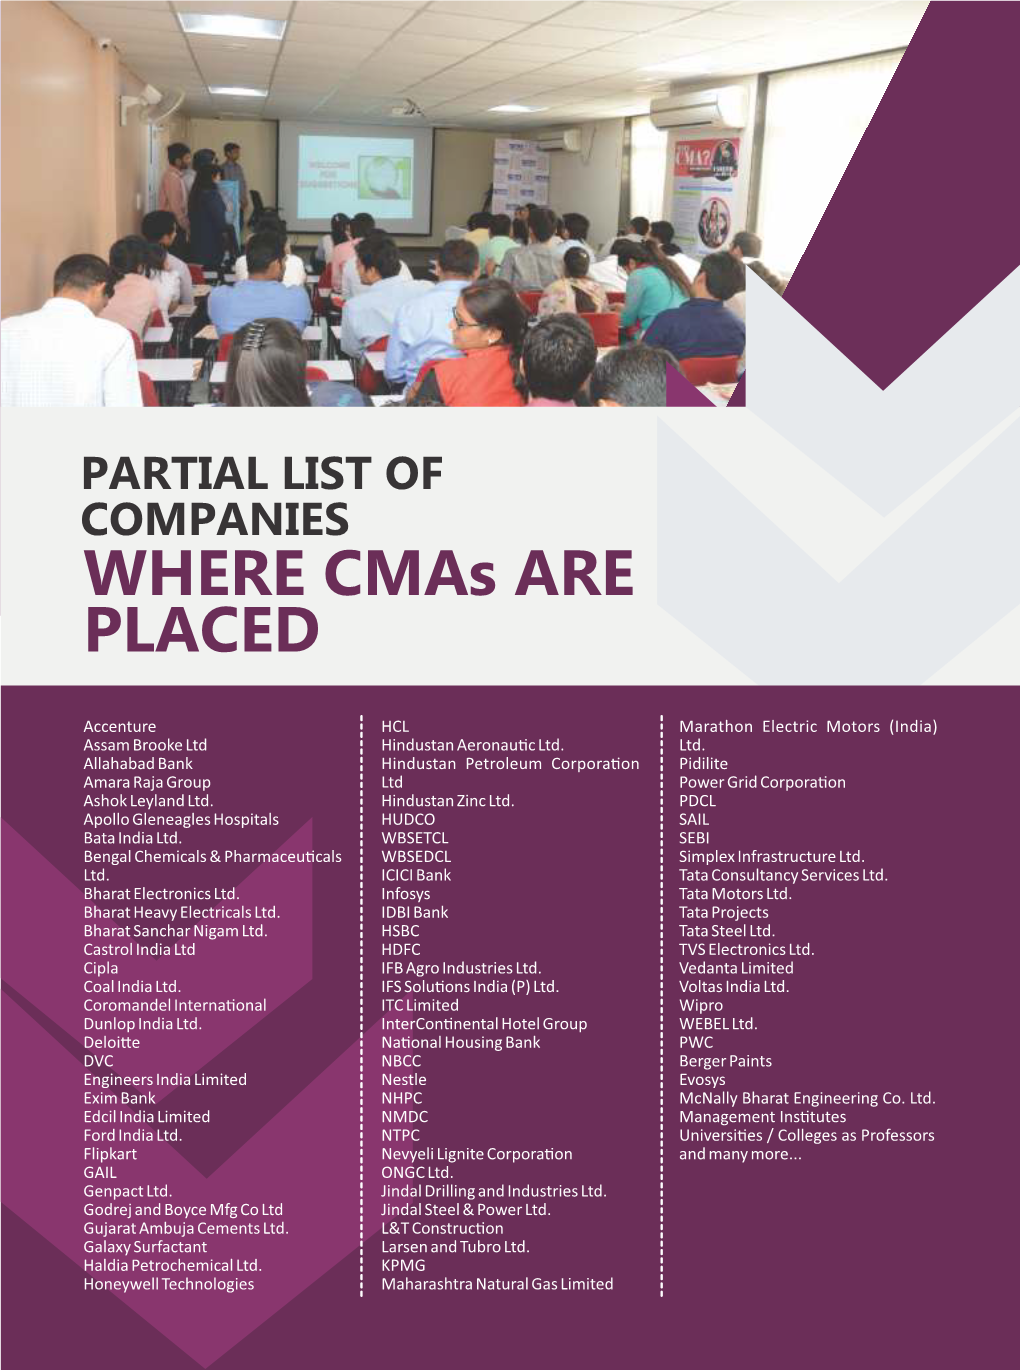 WHERE Cmas ARE PLACED